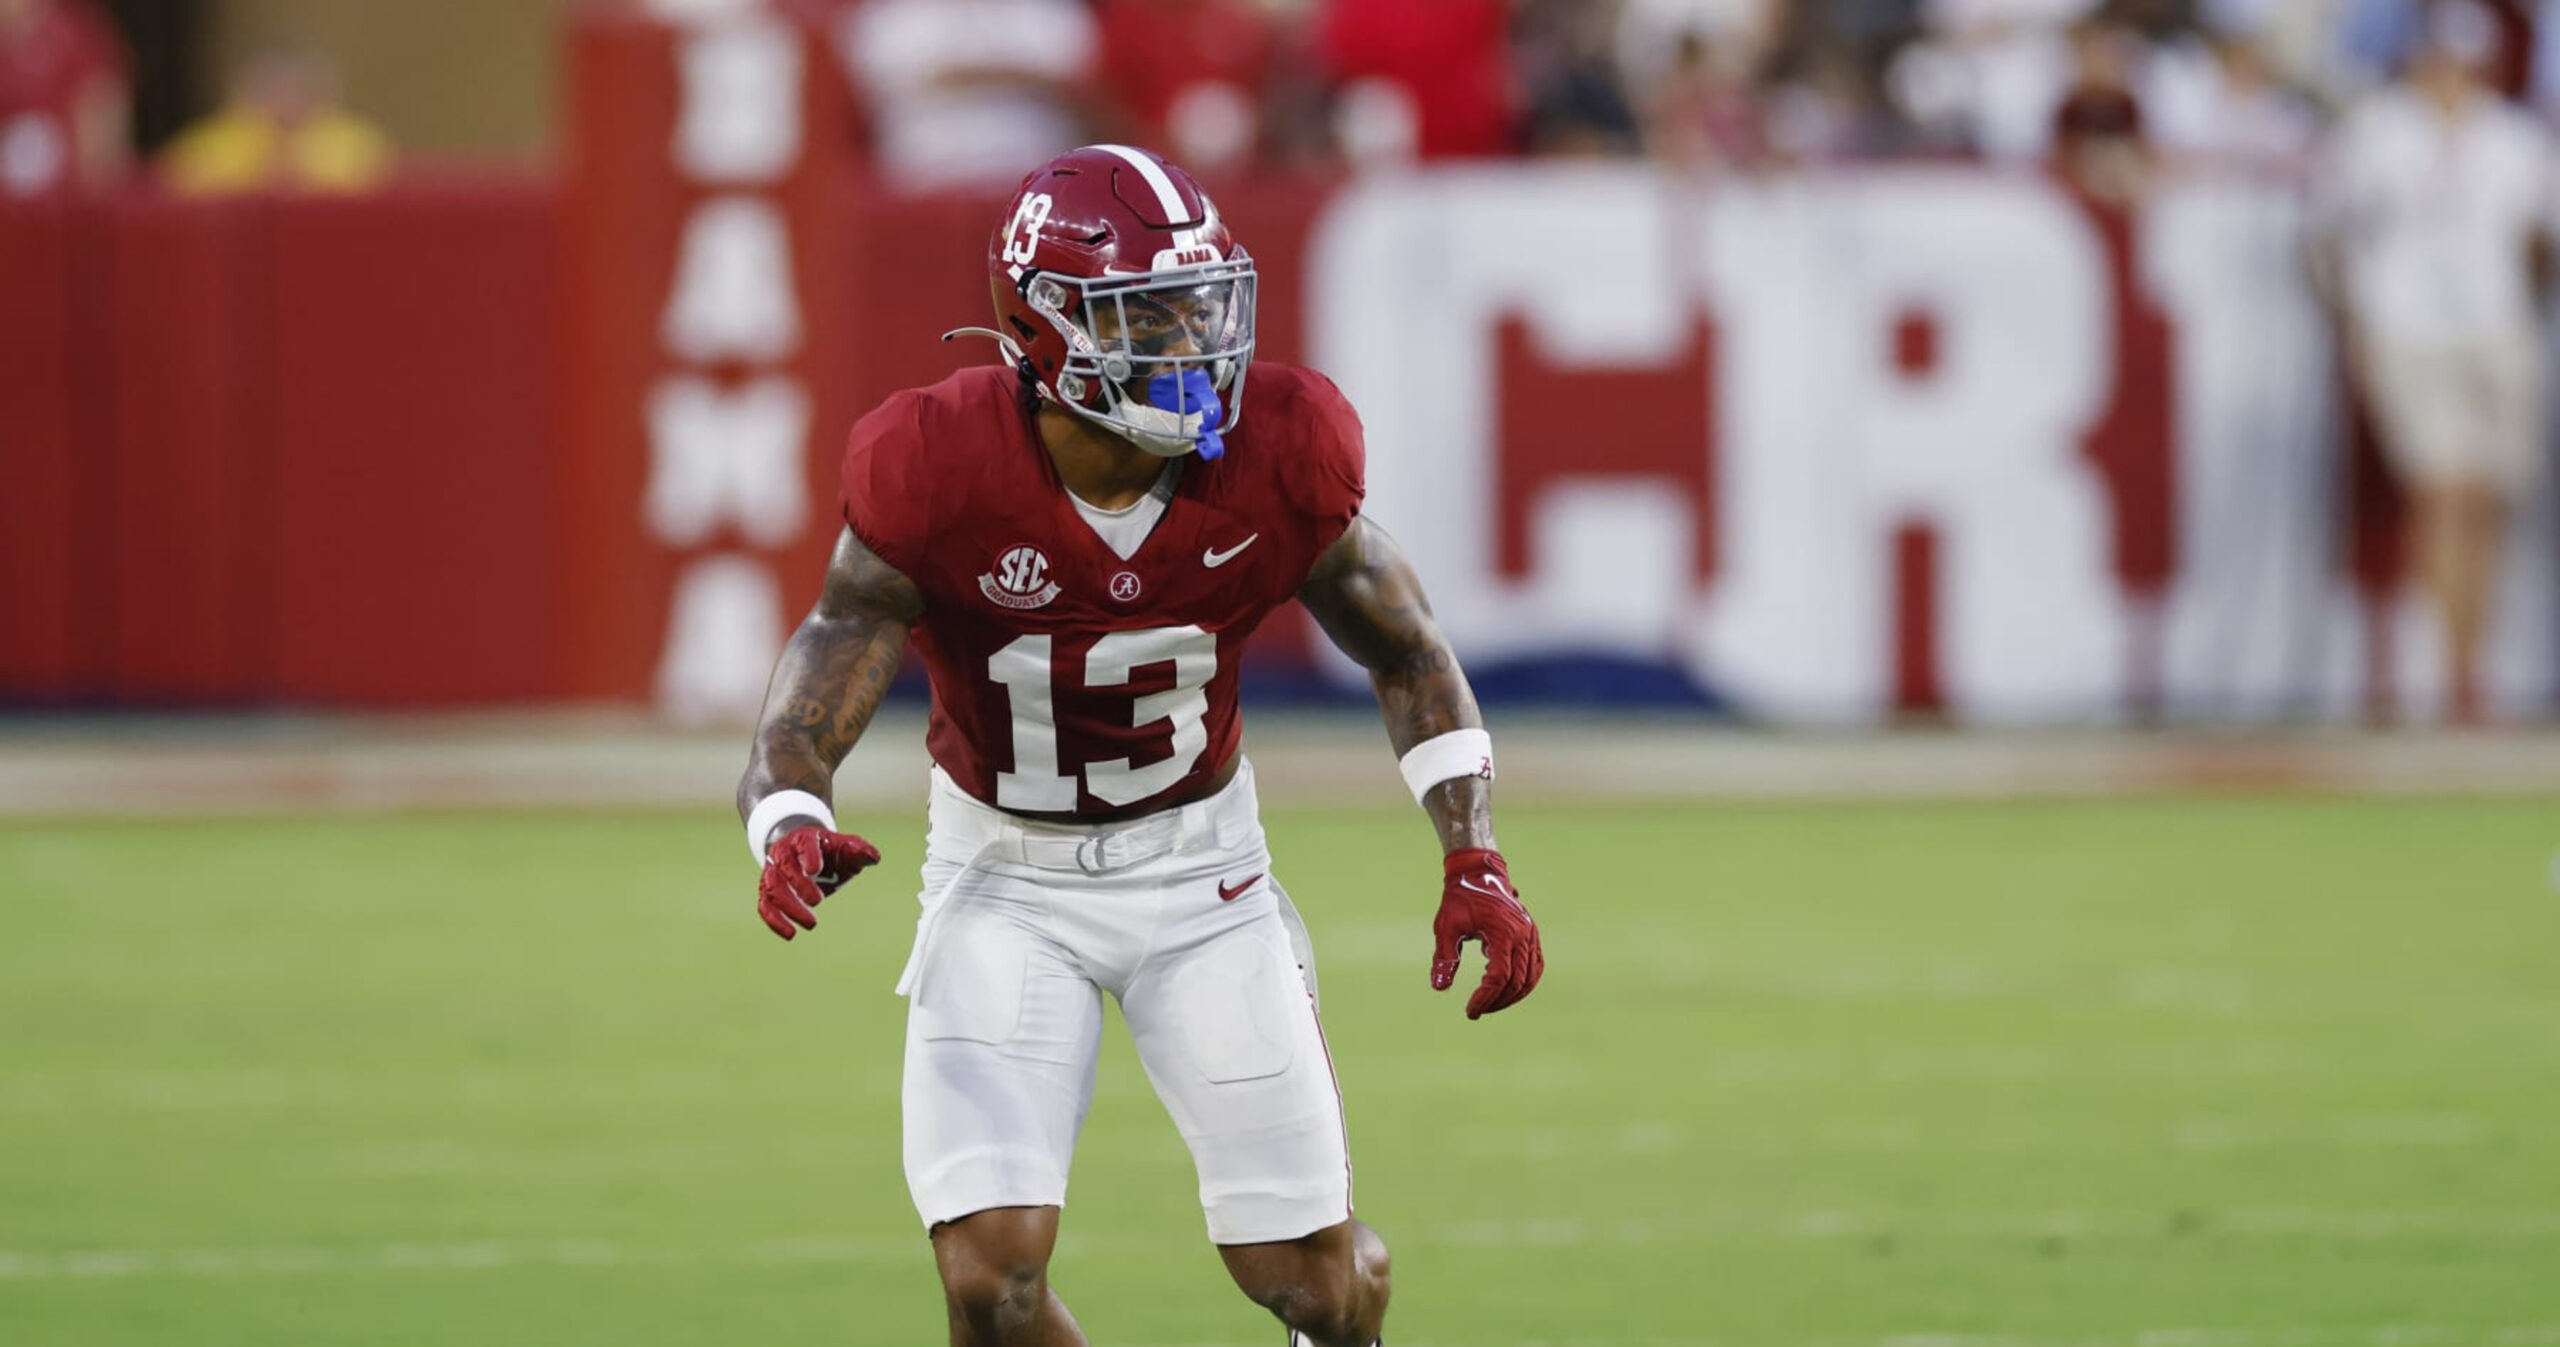 Alabama’s Malachi Moore Expected to Play vs. Texas After Injury